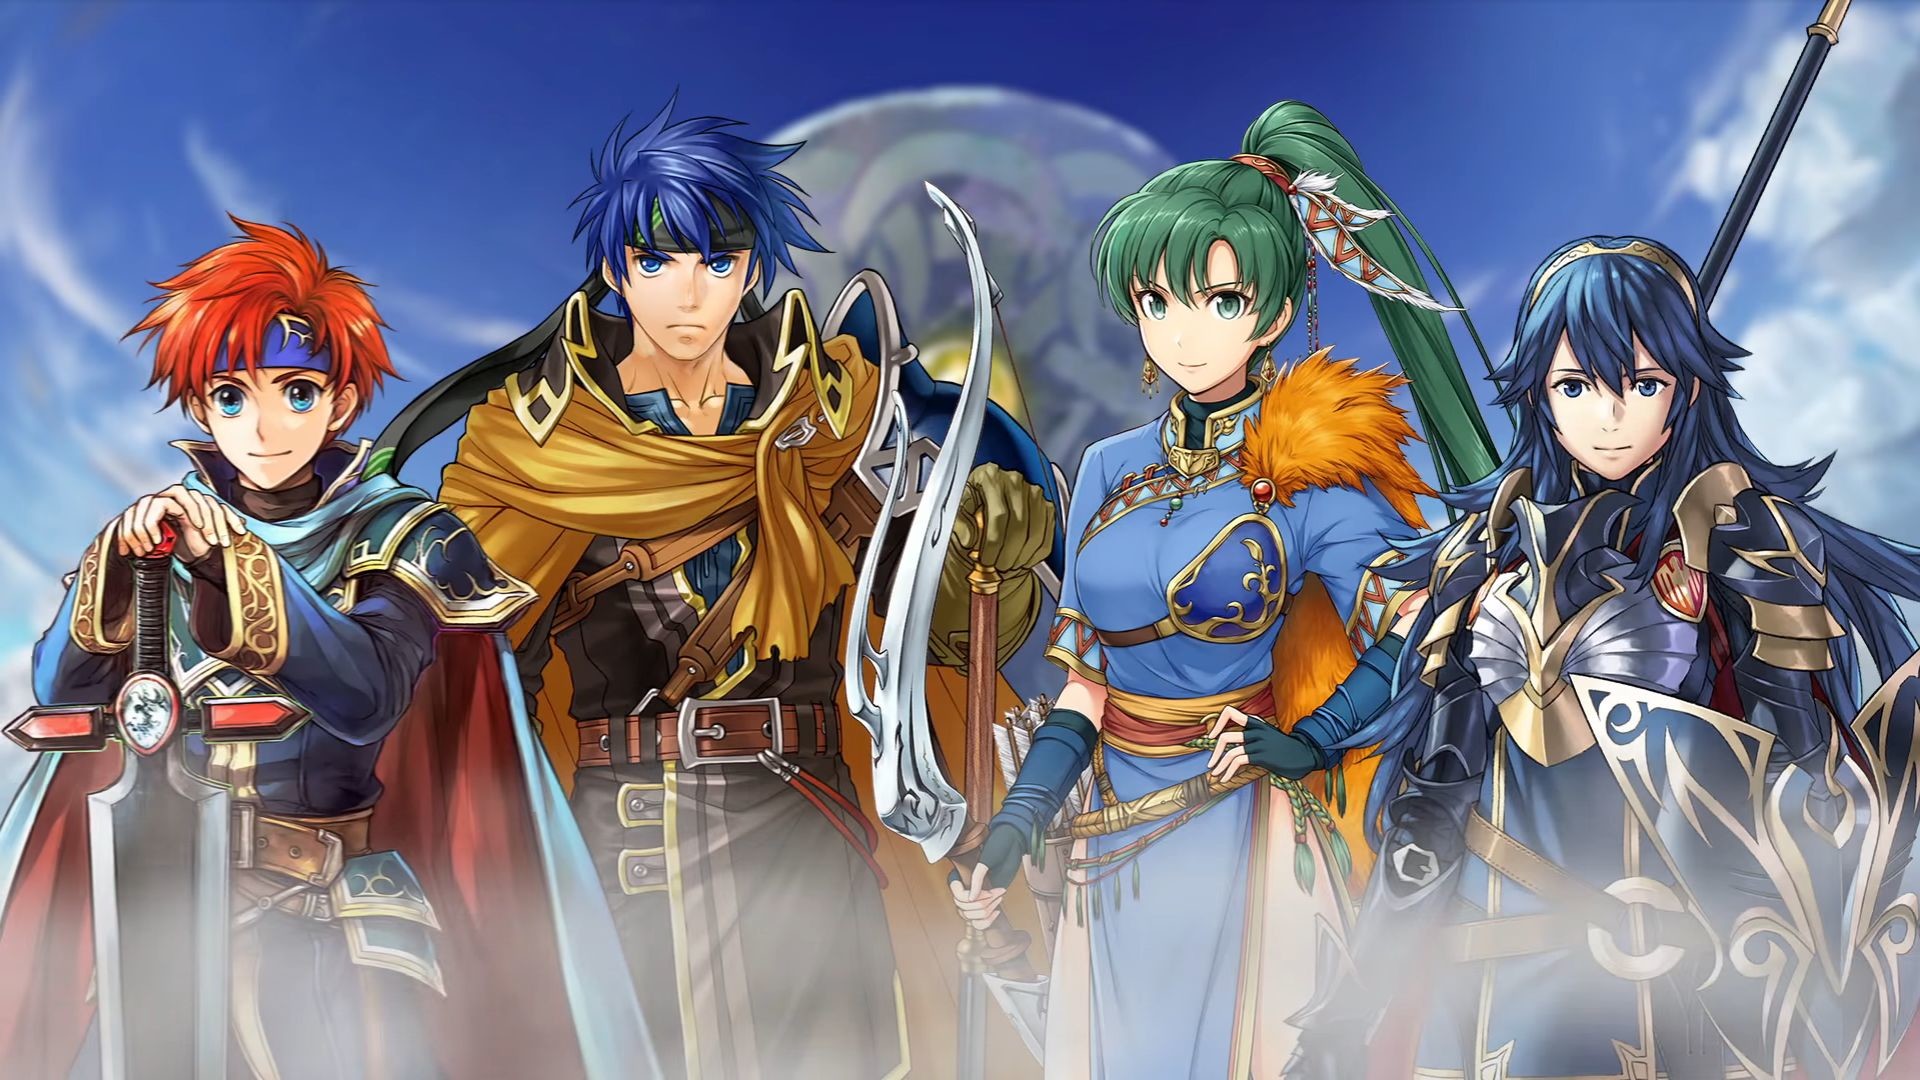 Fire Emblem Heroes Gets Live Action Trailer Showing Lucina, Lyn, Roy and Ike – Gaming Fan